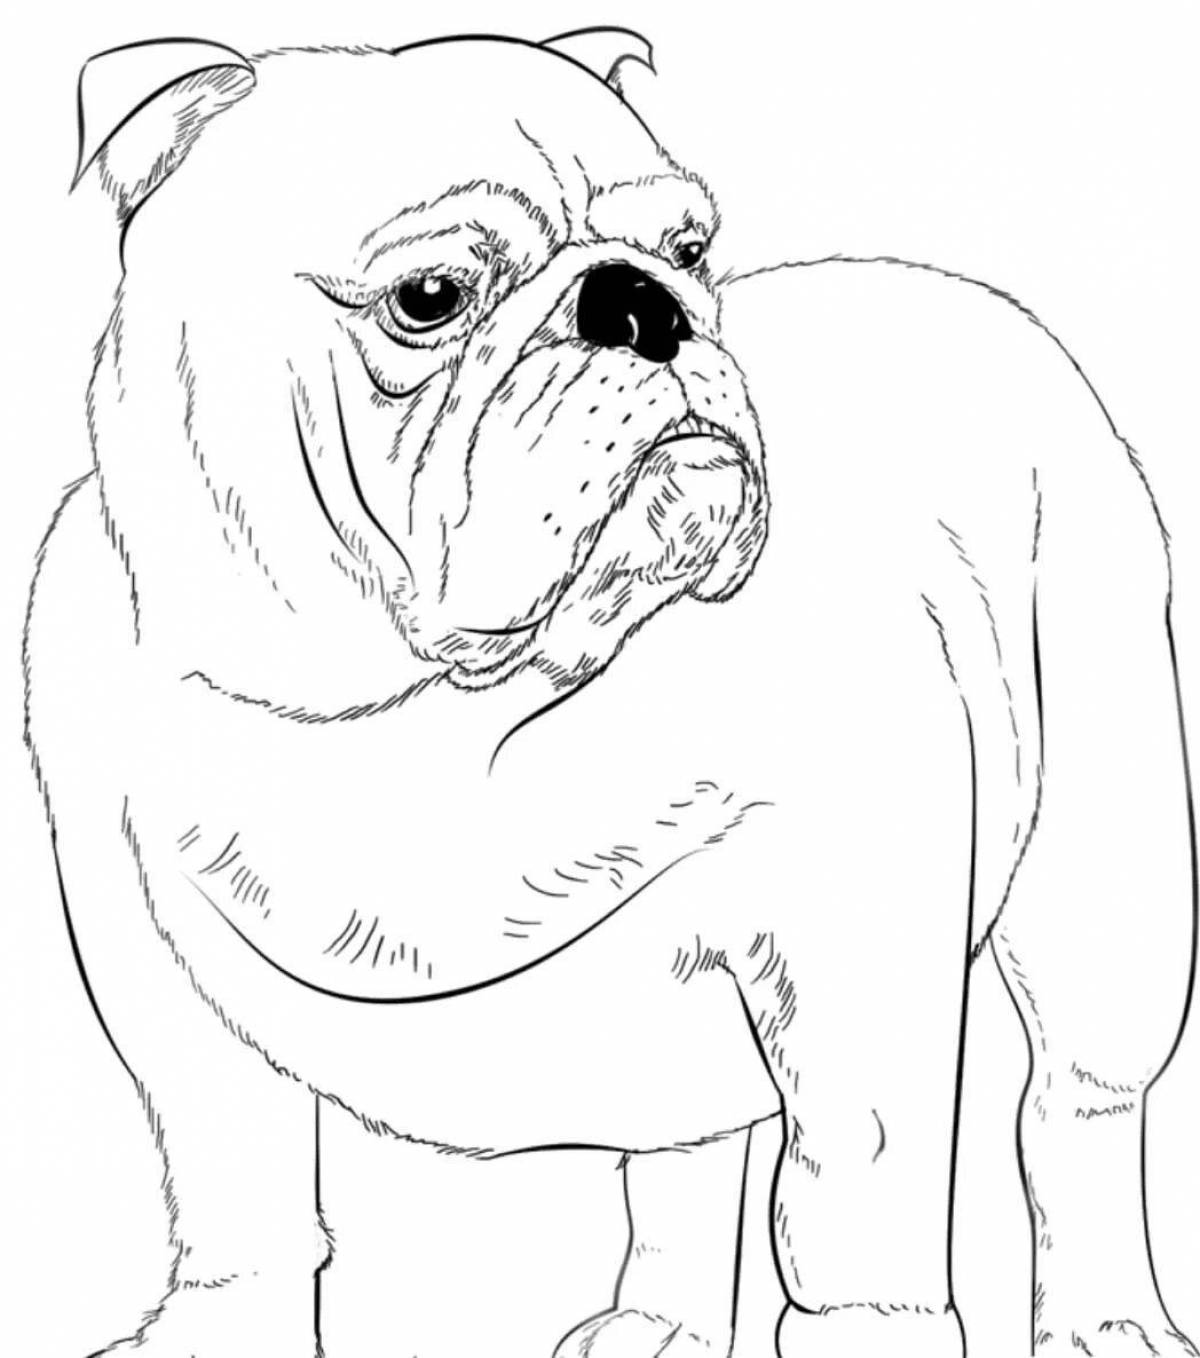 Coloring book grinning bulldog for kids